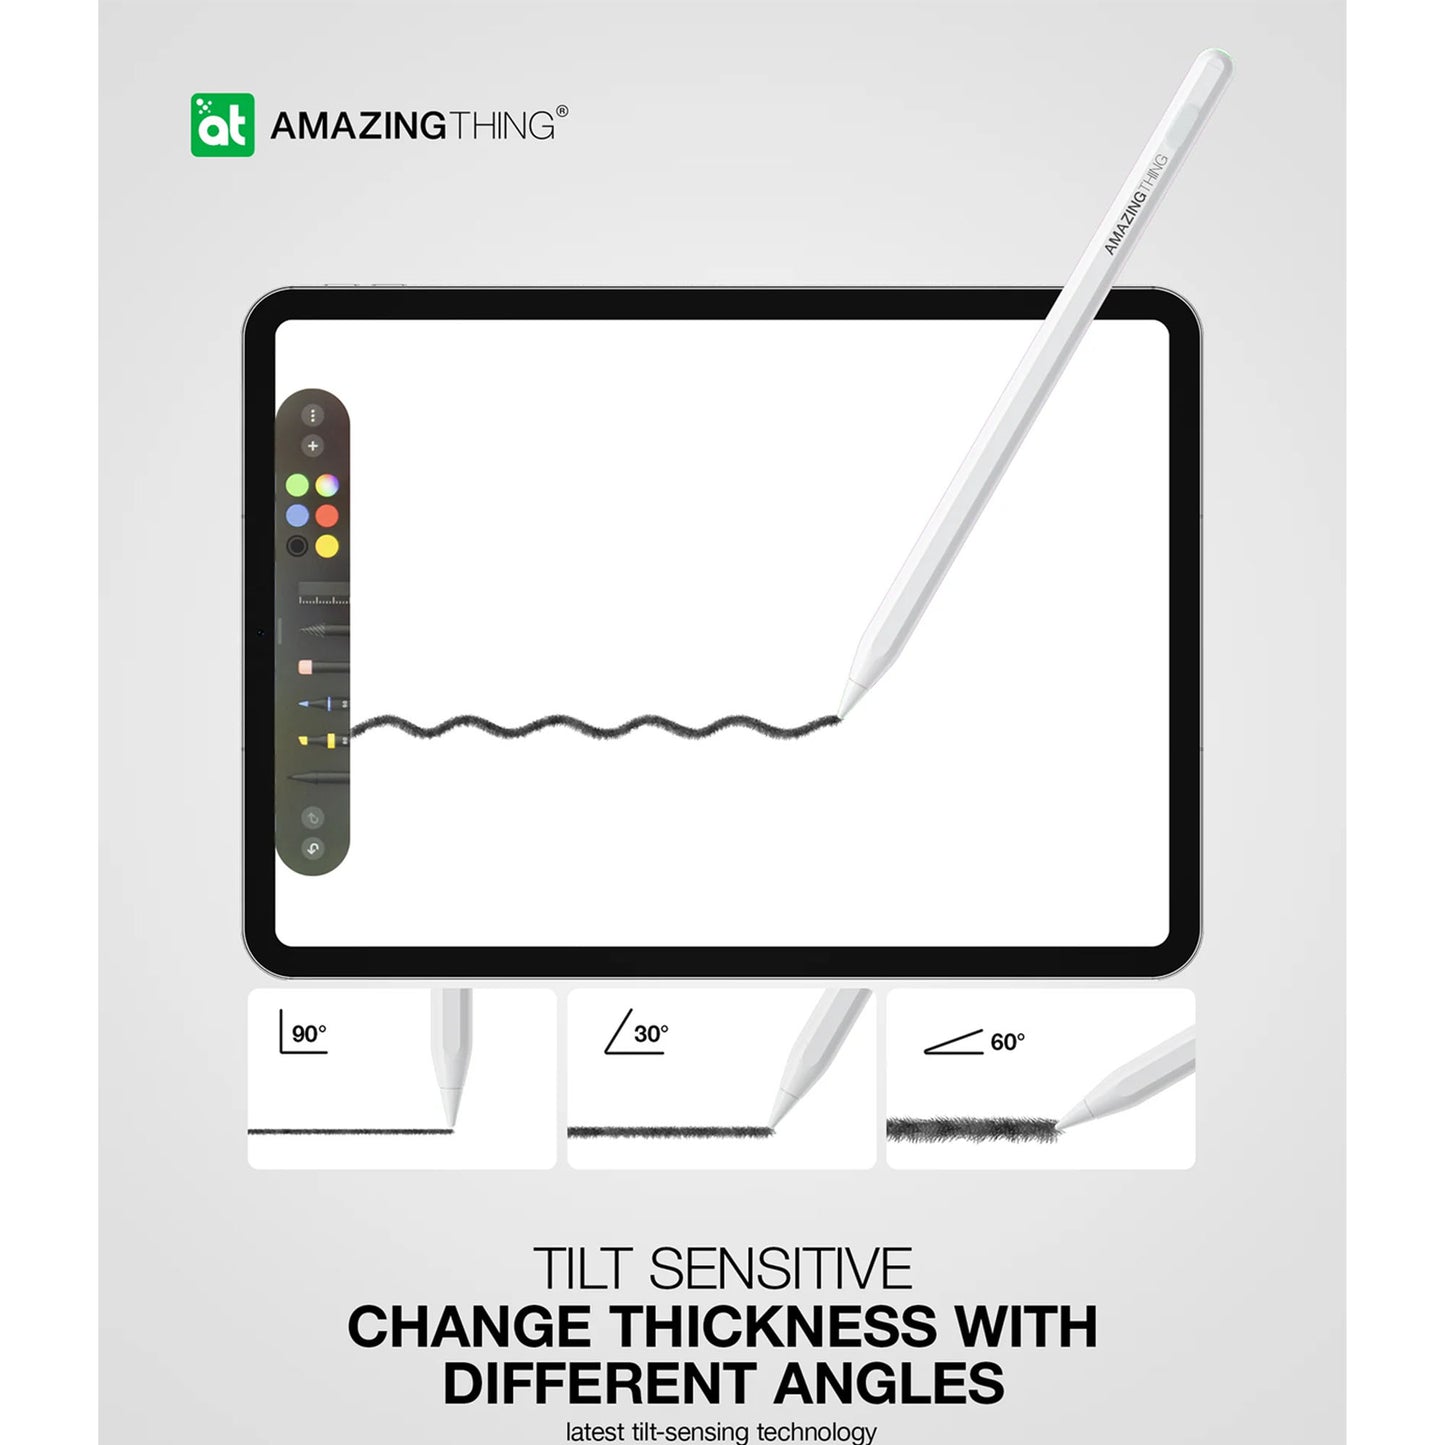 AmazingThing SKETCHPEN PRO II Stylus Pen with Magnetic Attachment stylus pen (Barcode: 4892878079020 )